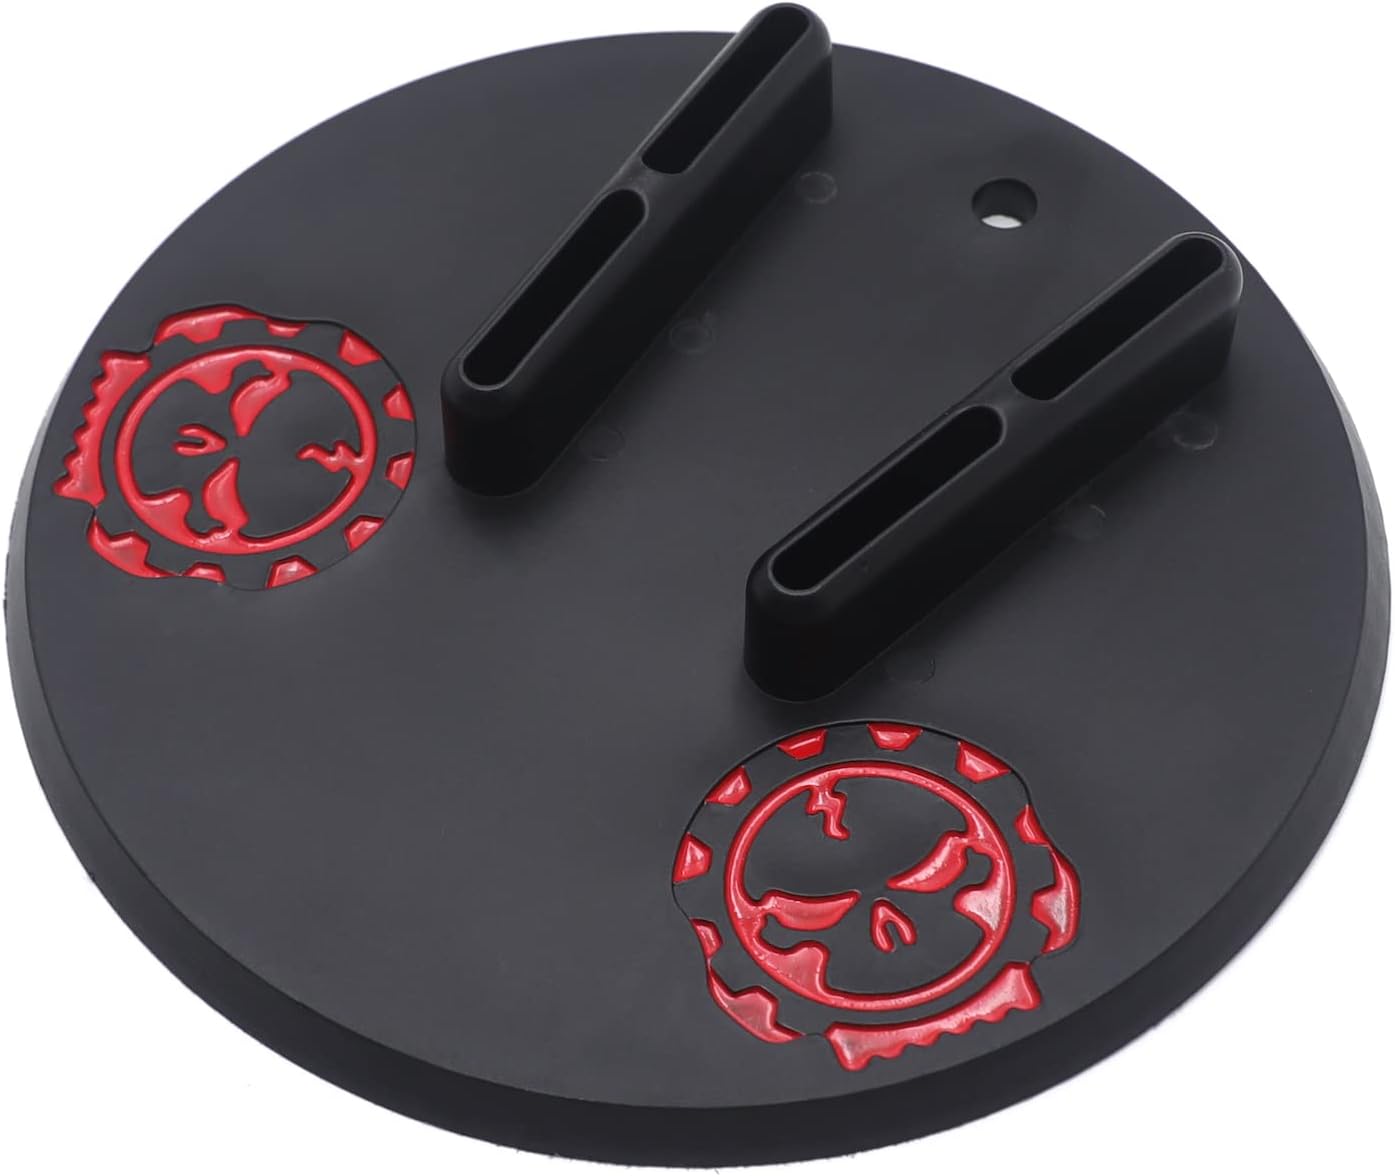 Motorcycle Kickstand 5 inch Round Punisher Pad by Witchdoctors